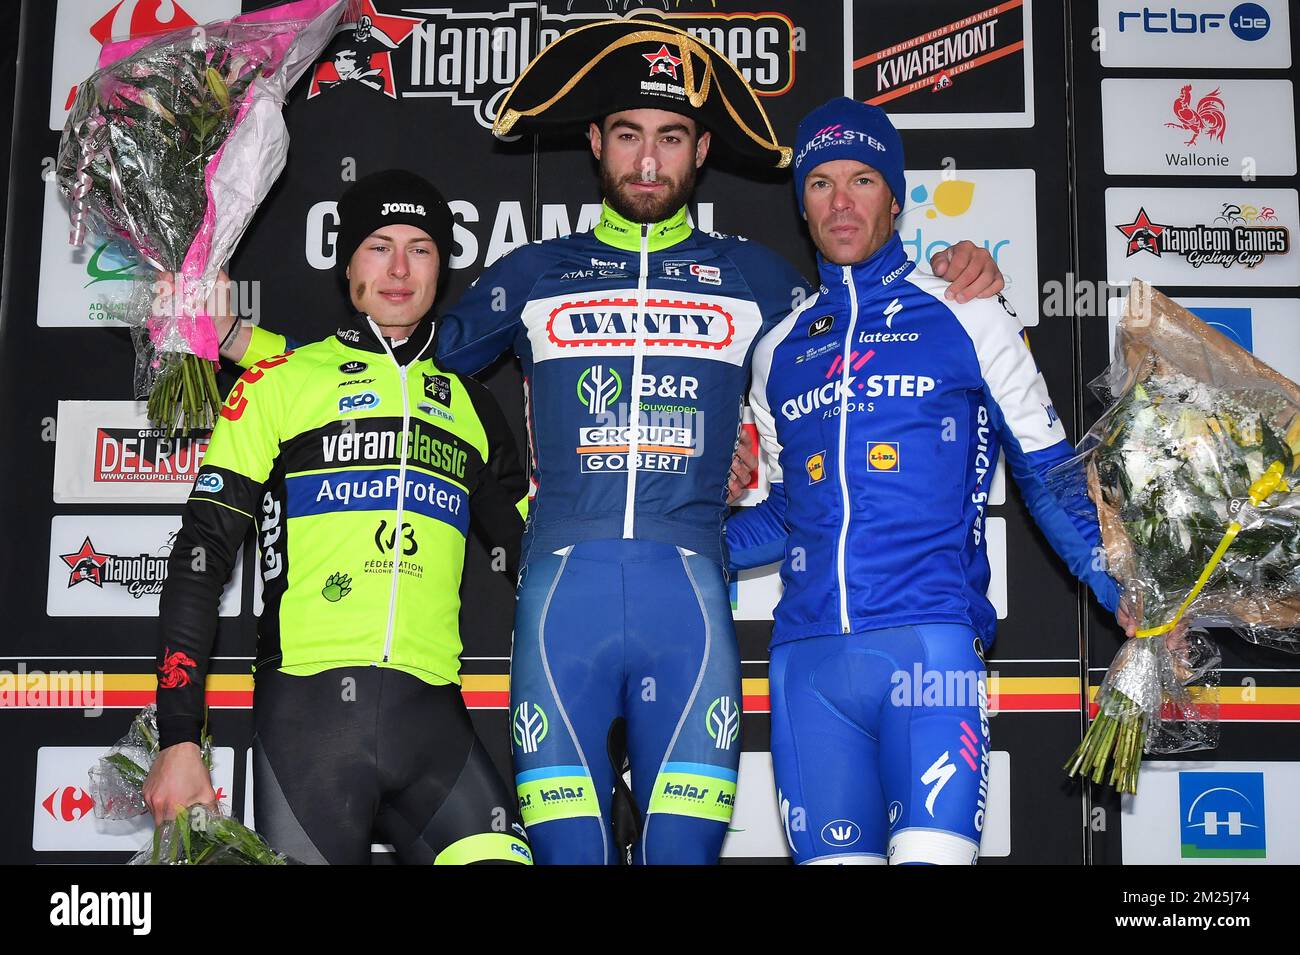 L-R, second, Luxembourgian Alex Kirsch of WB Veranclassic Aqua Protect, winner Belgian Guillaume Van Keirsbulck of Wanty-Groupe Gobert and third, Belgian Iljo Keisse of Quick-Step Floors celebrate on the podium after the 49th edition of the Grand Prix du Samyn cycling race, Wednesday 01 March 2017. The race starts in Quaregnon and ends in Dour (202,6km). The Grand Prix du Samyn is also the first round of the Napoleon Games Cup. BELGA PHOTO DAVID STOCKMAN Stock Photo